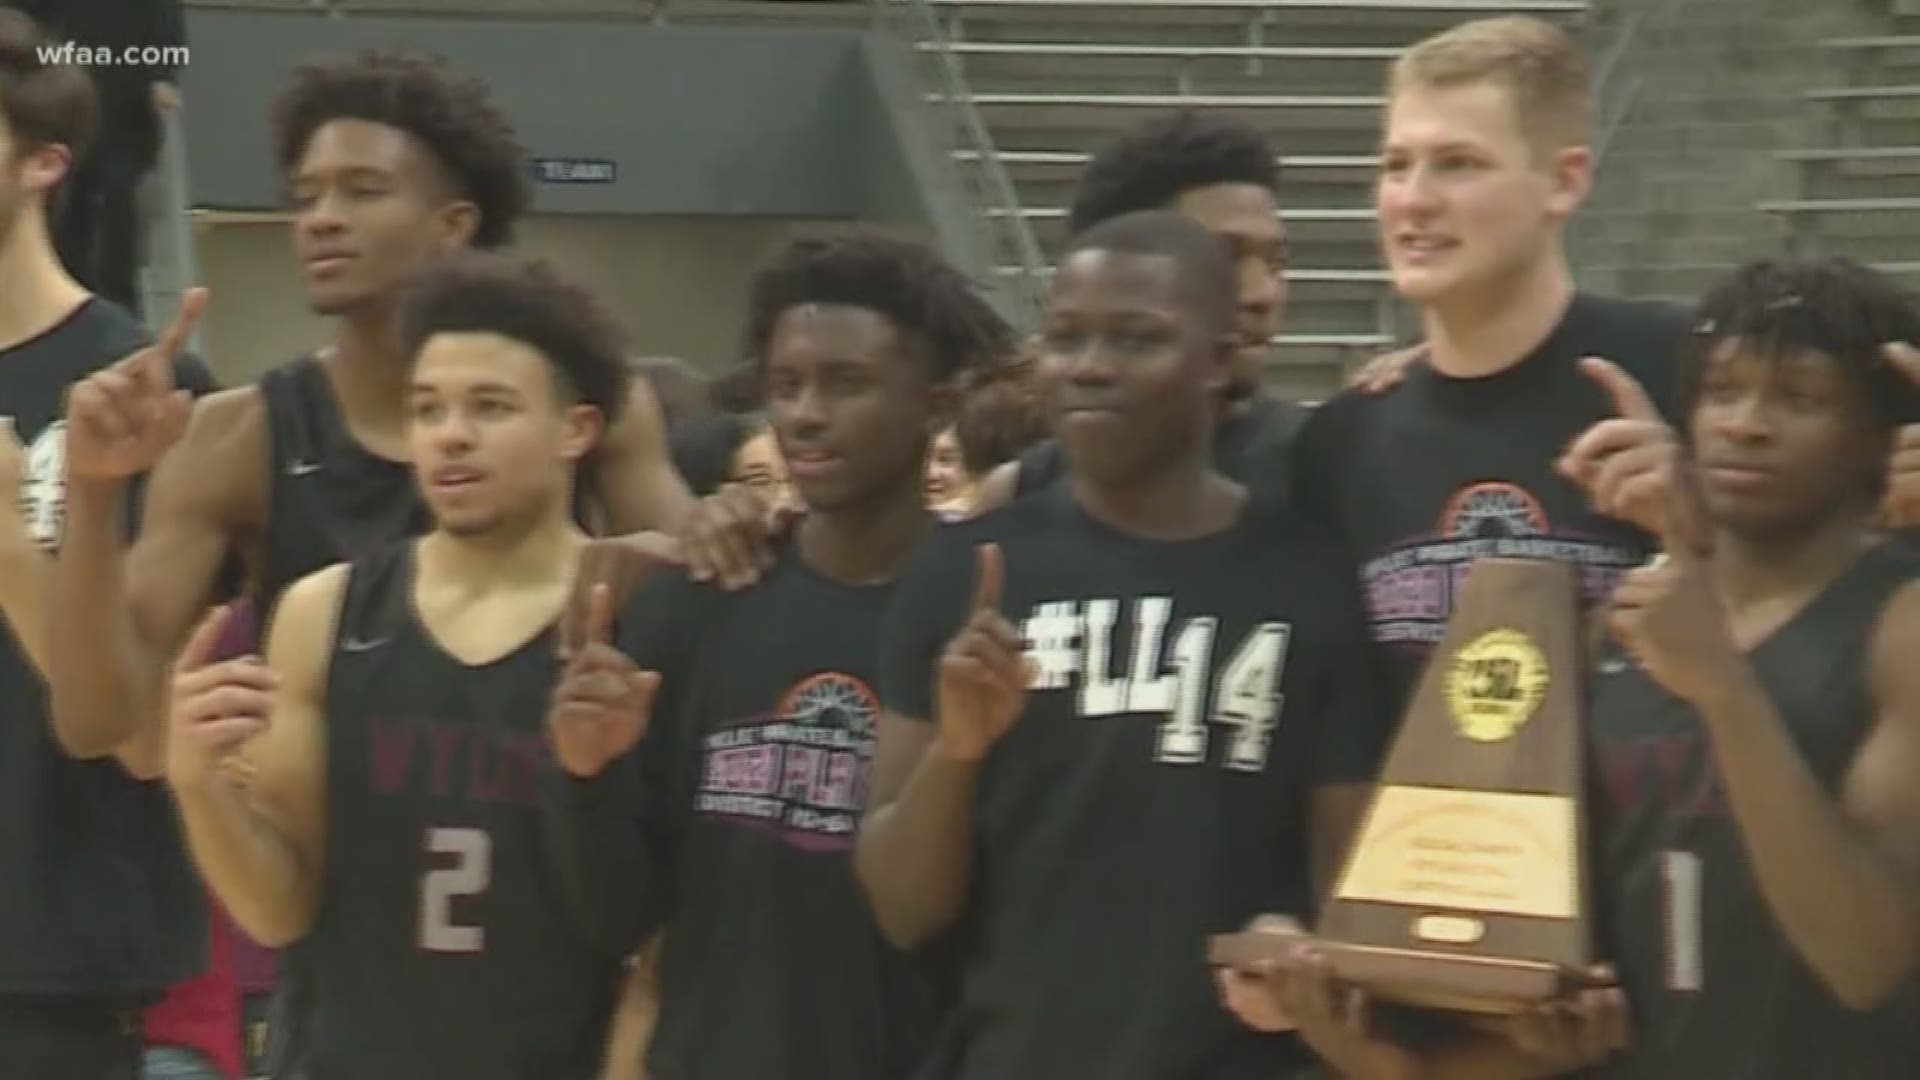 In the Region II Final, unranked Wylie faced No. 3 Killeen Ellison —a team on a 24-game win streak. The Wylie Pirates stole the show.